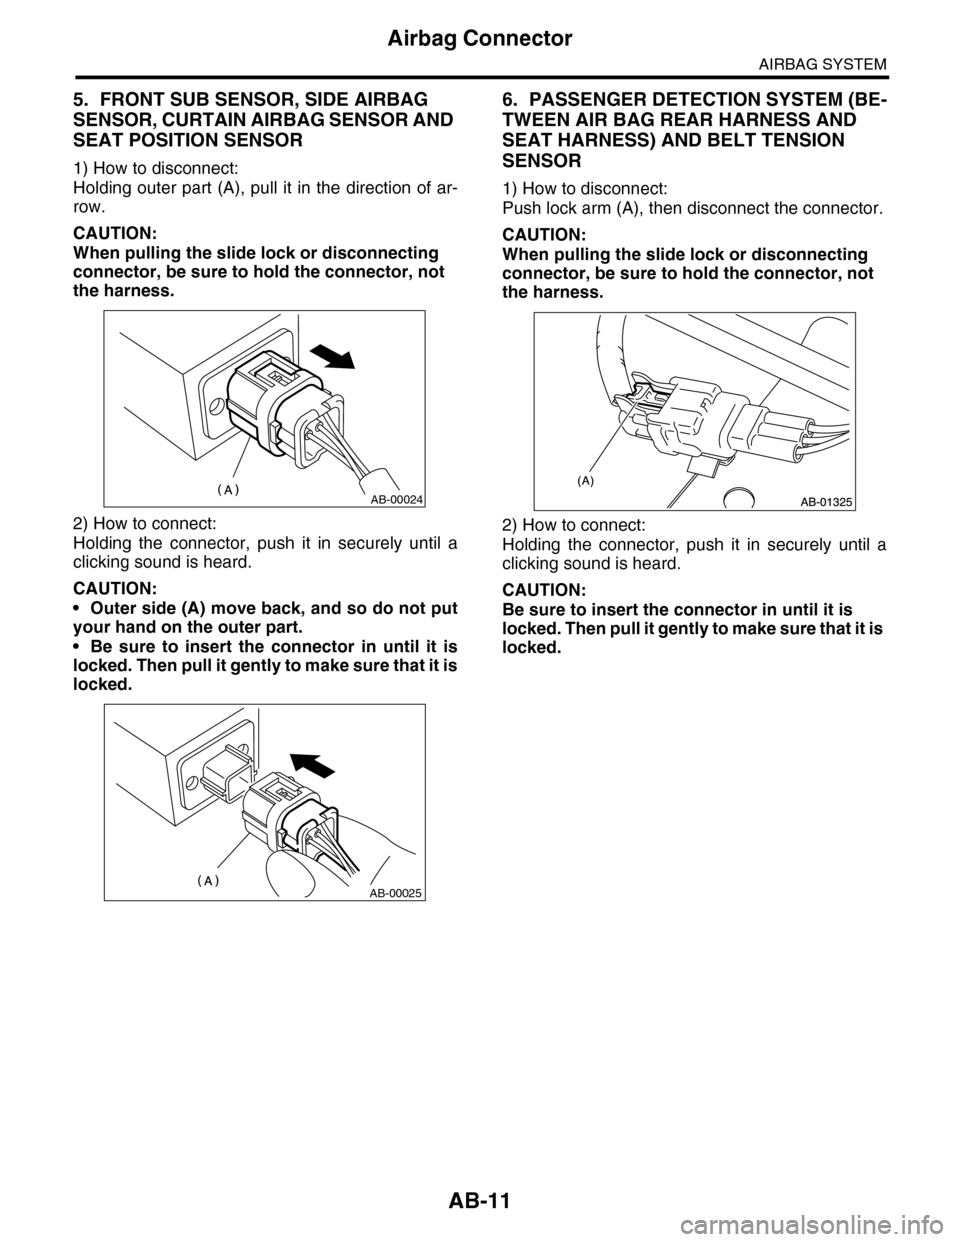 SUBARU TRIBECA 2009 1.G Service Workshop Manual AB-11
Airbag Connector
AIRBAG SYSTEM
5. FRONT SUB SENSOR, SIDE AIRBAG 
SENSOR, CURTAIN AIRBAG SENSOR AND 
SEAT POSITION SENSOR
1) How to disconnect:
Holding outer part (A), pull it in the direction of